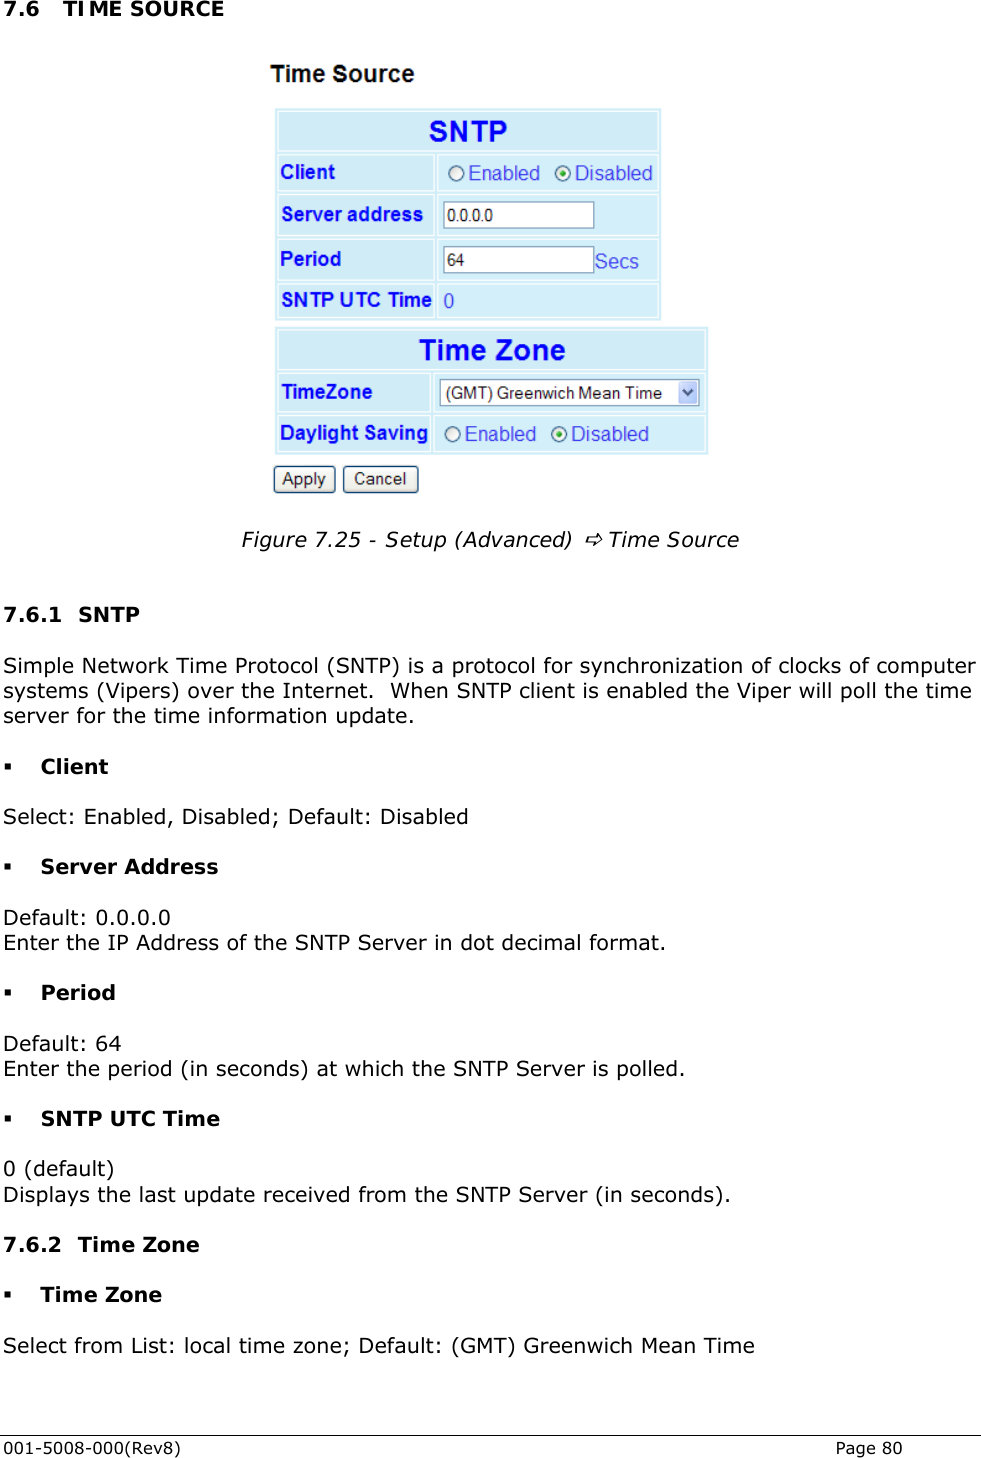  .6 TIME SOURCE 7 Figure 7.25 - Setup (Advanced) D Time Source  7.6.1 SNTP Simple Network Time Protocol (SNTP) is a protocol for synchronization of clocks of computer systems (Vipers) o will poll the time server for the time information update.  Client Enter the IP Address of the SNTP Server in dot decimal format.  Period Enter the period (in seconds) at which the SNTP Server is polled.   SNTP UTC Time  (default) onds).  ver the Internet.  When SNTP client is enabled the Viper Select: Enabled, Disabled; Default: Disabled  Server Address Default: 0.0.0.0 Default: 64 0Displays the last update received from the SNTP Server (in sec7.6.2 Time Zone  Time Zone Select from List: local time zone; Default: (GMT) Greenwich Mean Time 001-5008-000(Rev8)   Page 80 